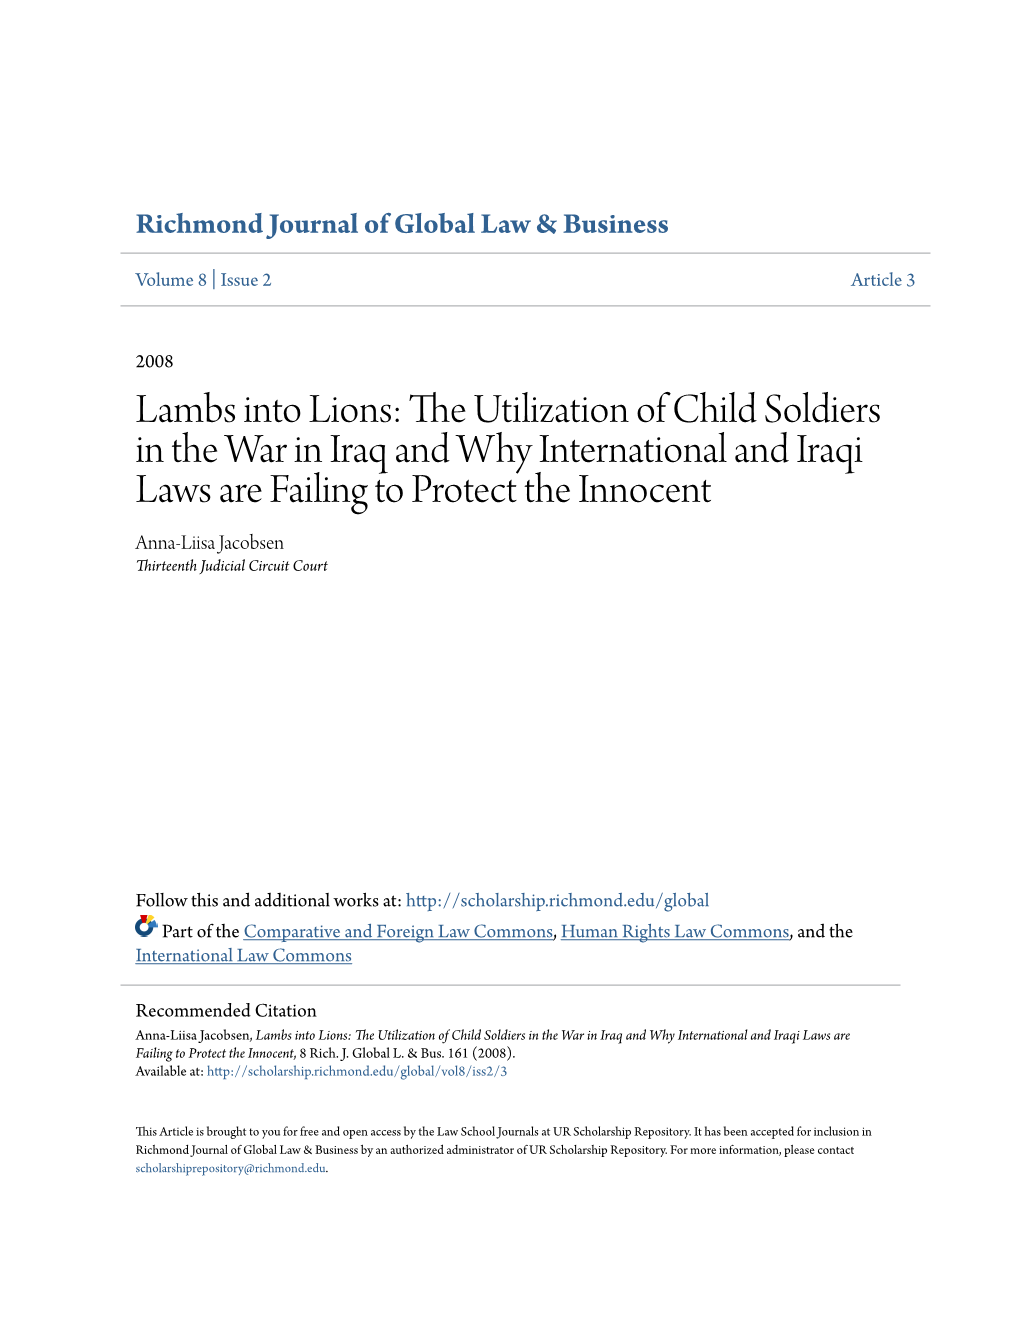 Lambs Into Lions: the Utilization of Child Soldiers in the War in Iraq and Why International and Iraqi Laws Are Failing to Protect the Innocent, 8 Rich